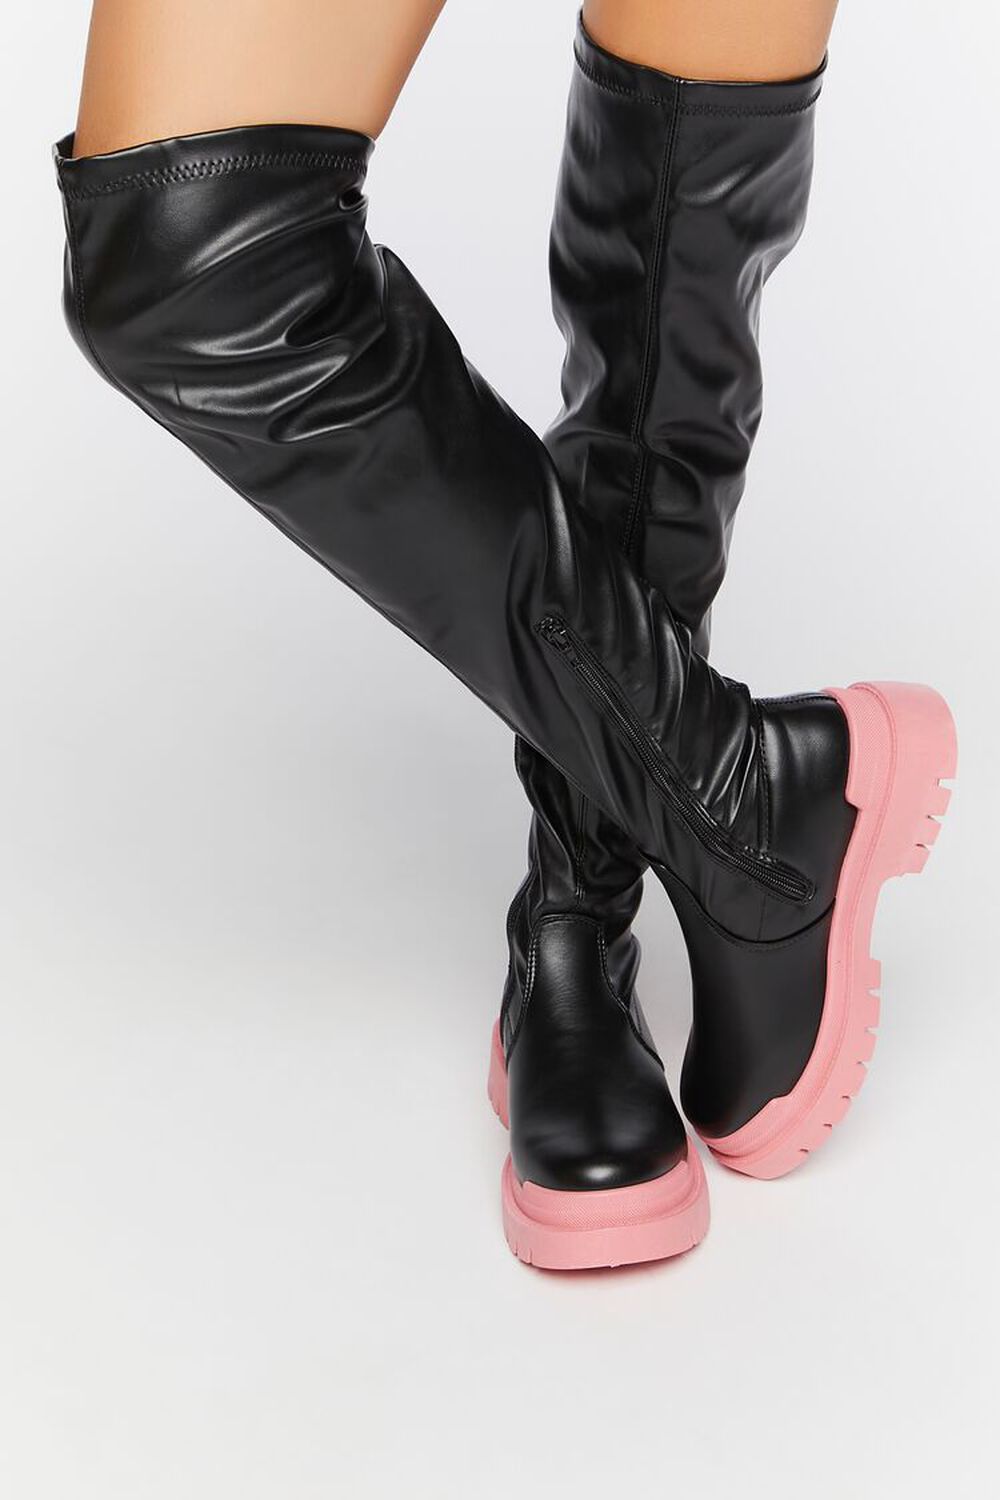 BLACK/PINK Colorblock Over-the-Knee Lug-Sole Boots, image 1